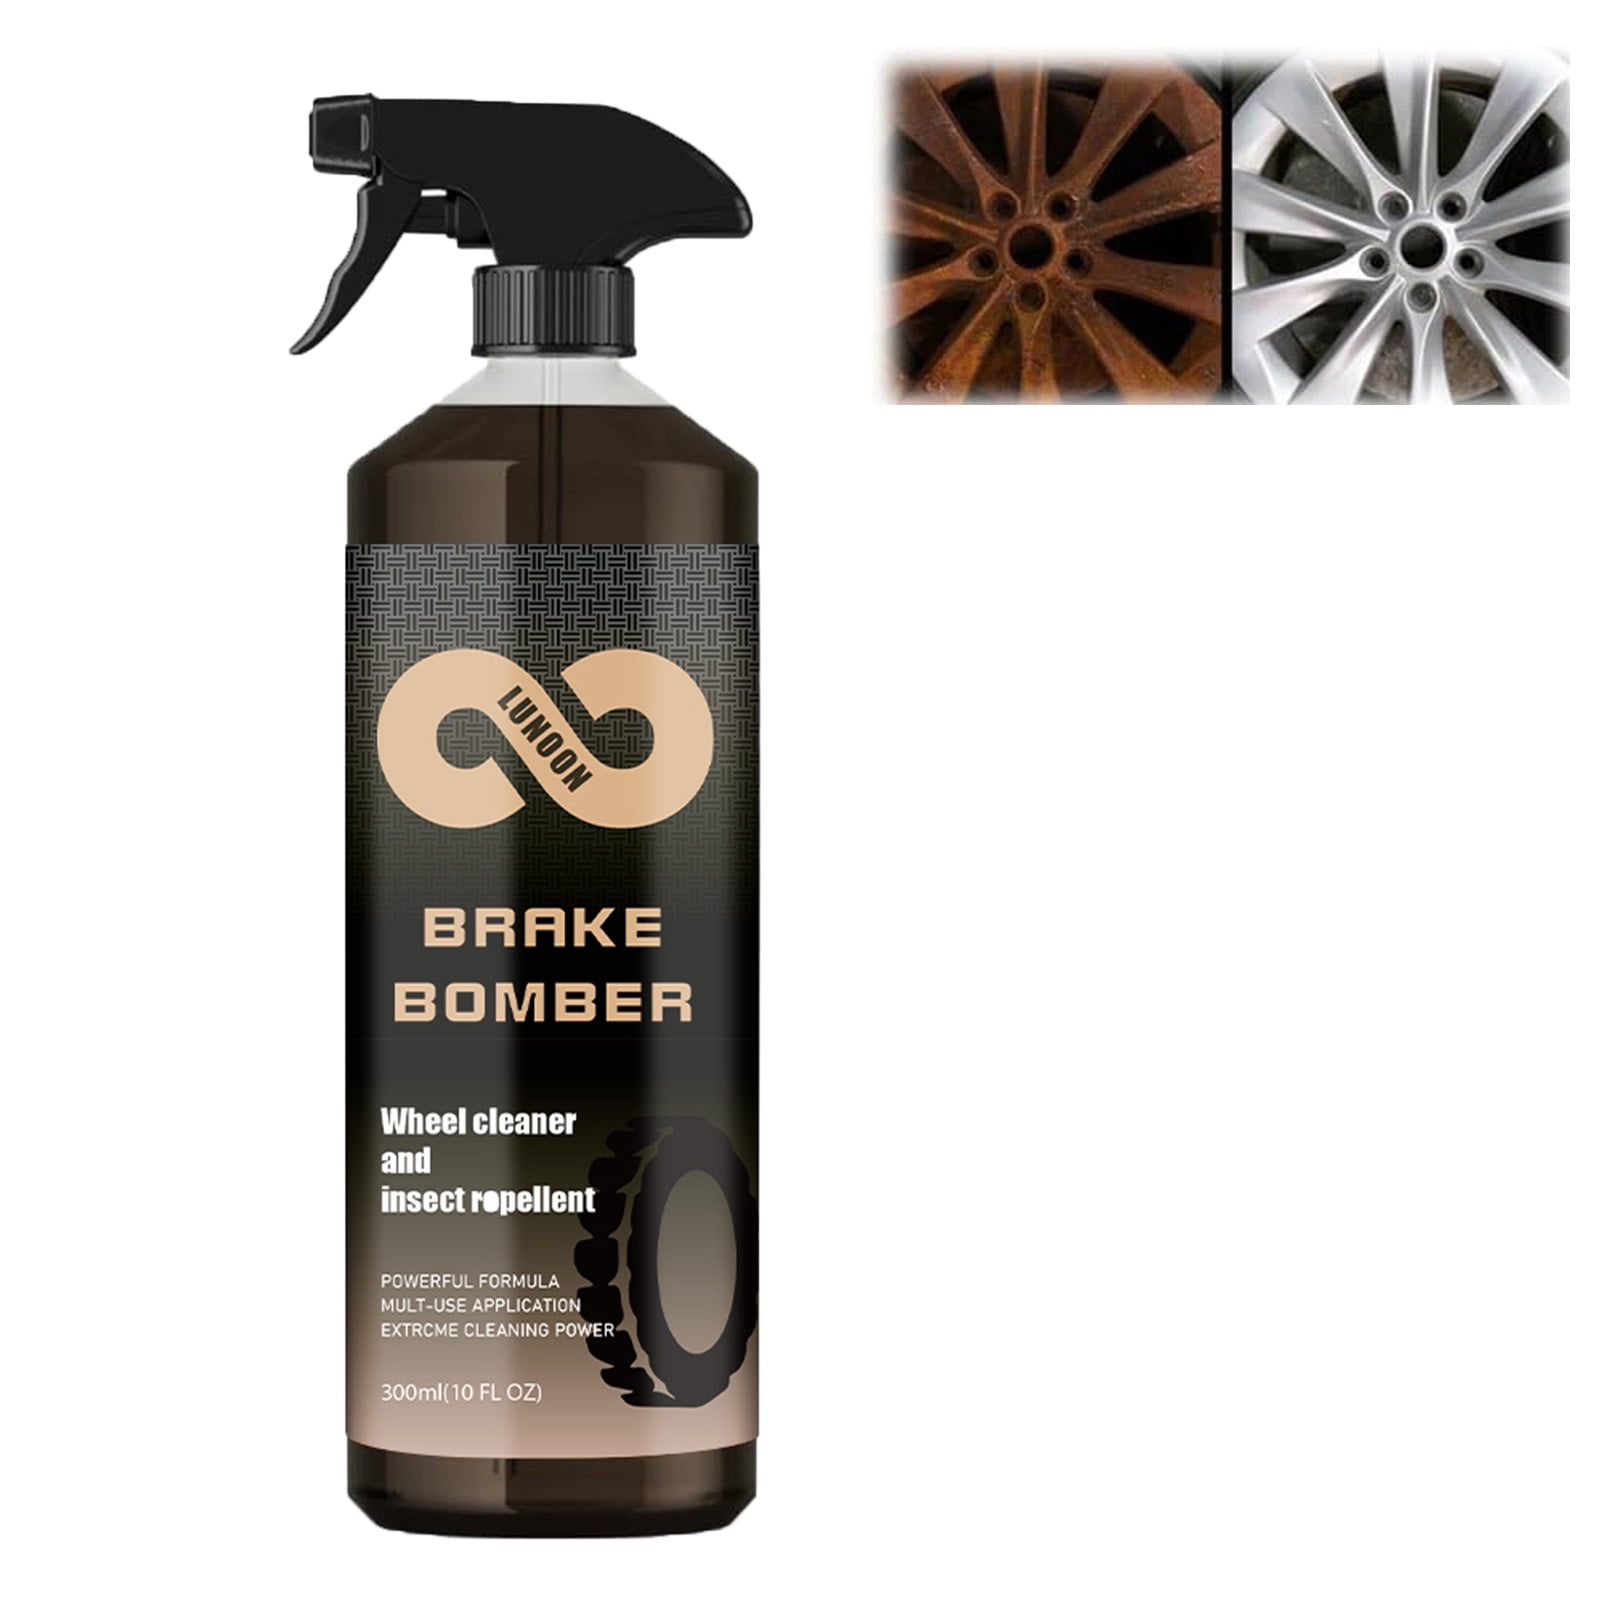 LANE'S New Aluminum Wheel Cleaner- Eliminates Hard Scrubbing, Safe on  Metals, and Works Instantly, Wheel Cleaner (32 Oz)